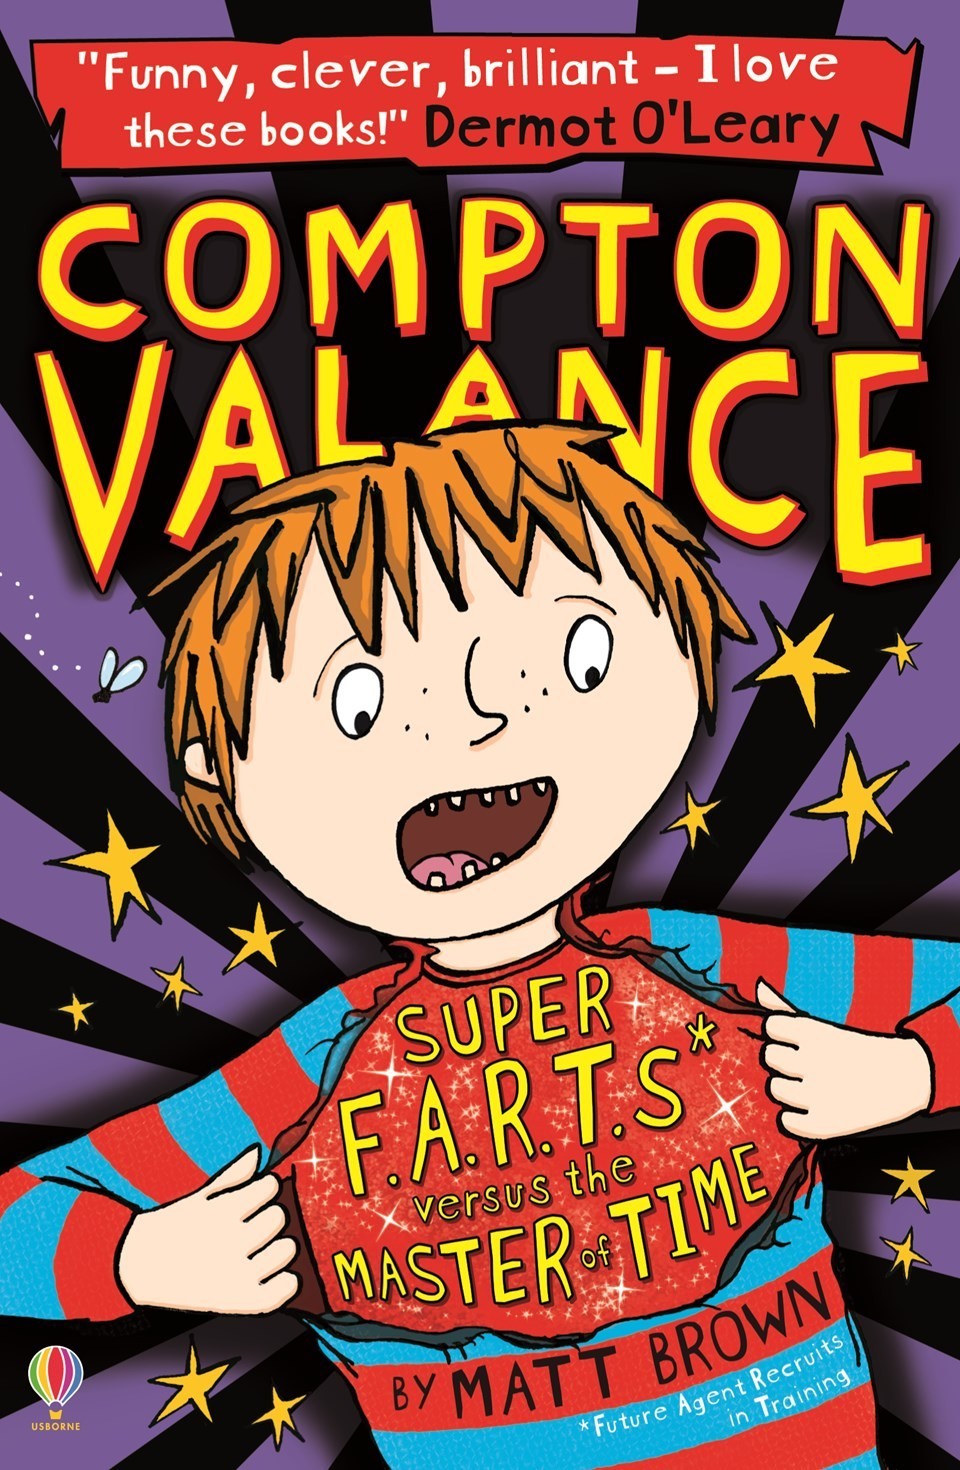 Compton Valance — Super F.A.R.T.S versus the Master of Time